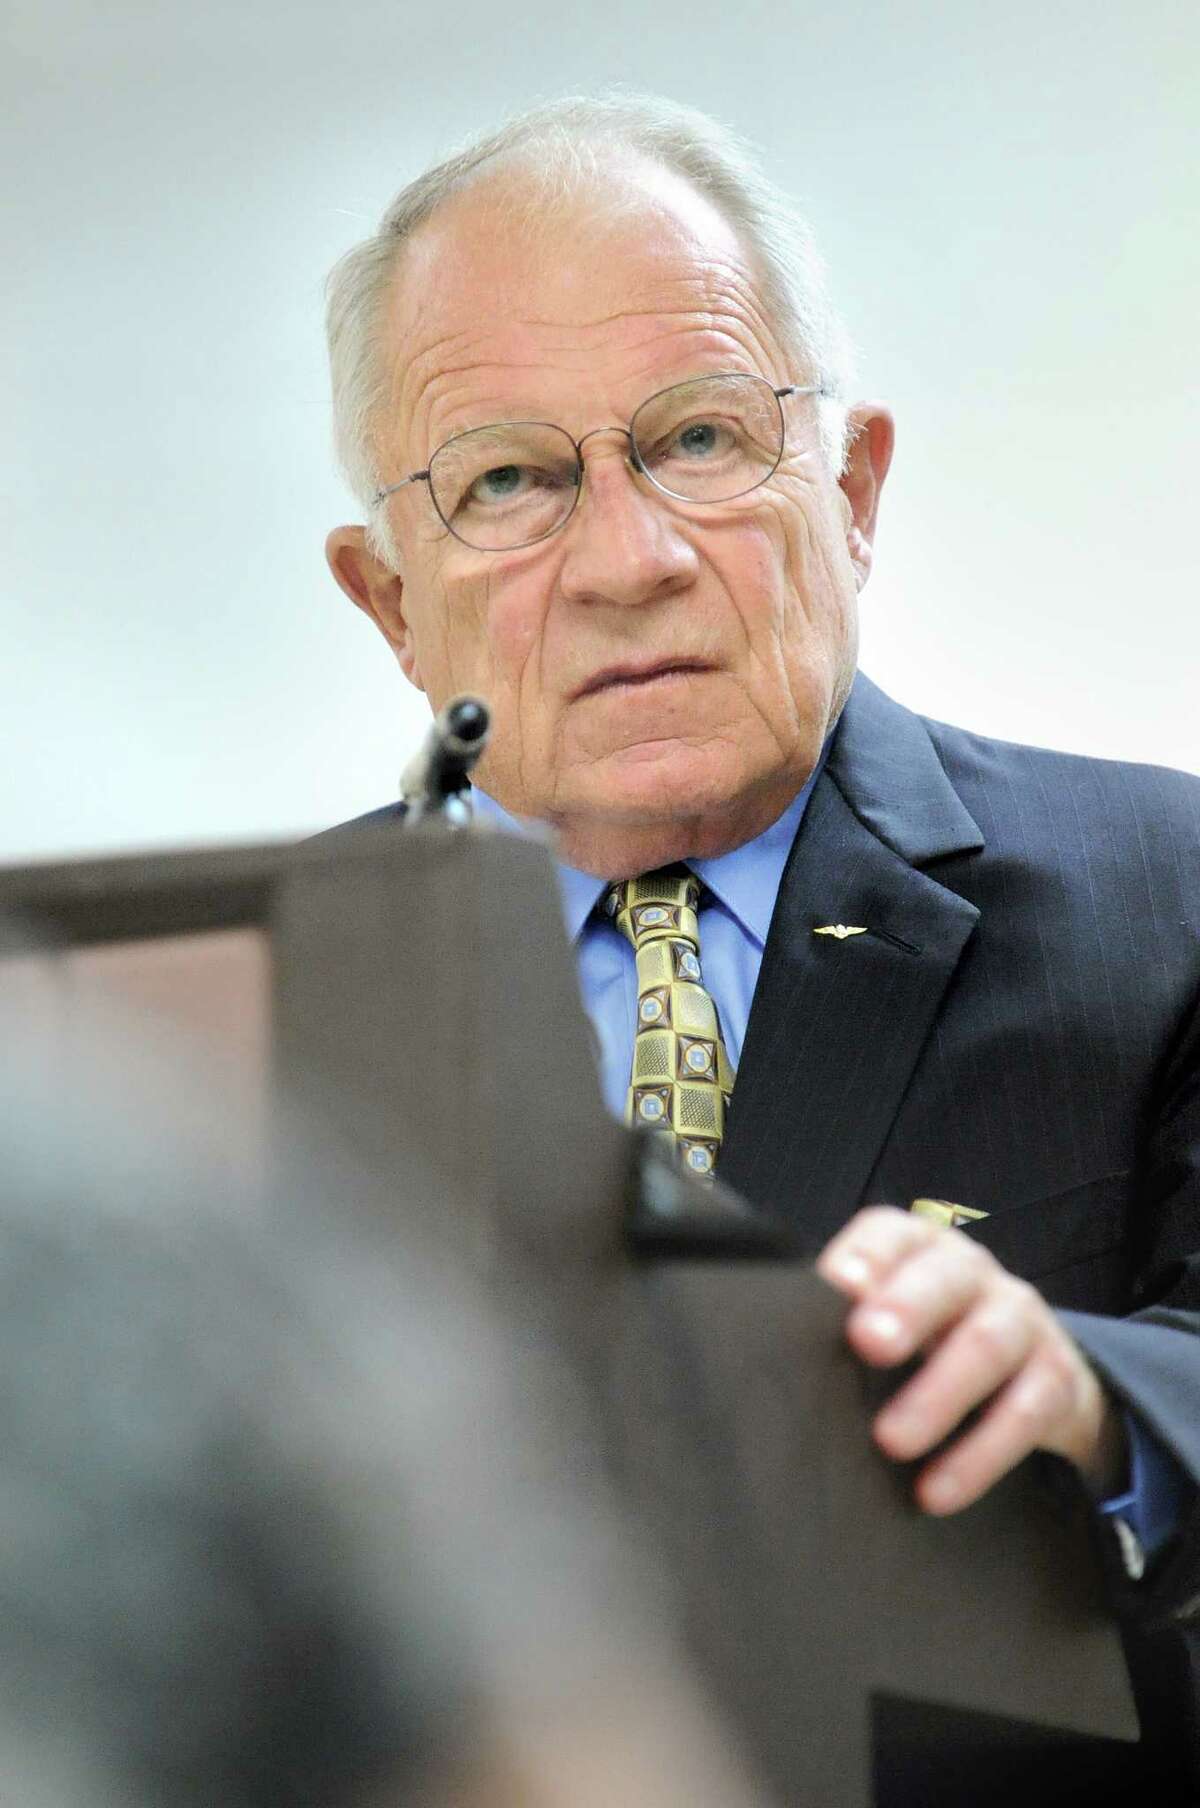 F. Lee Bailey, '60's icon and one of the defense attorneys for OJ Simpson, addresses Franz Douskey's Civics class at Gateway College on polygraghs and their use in preventing recividism especially among sexual offenders. VM Williams 09.28.10